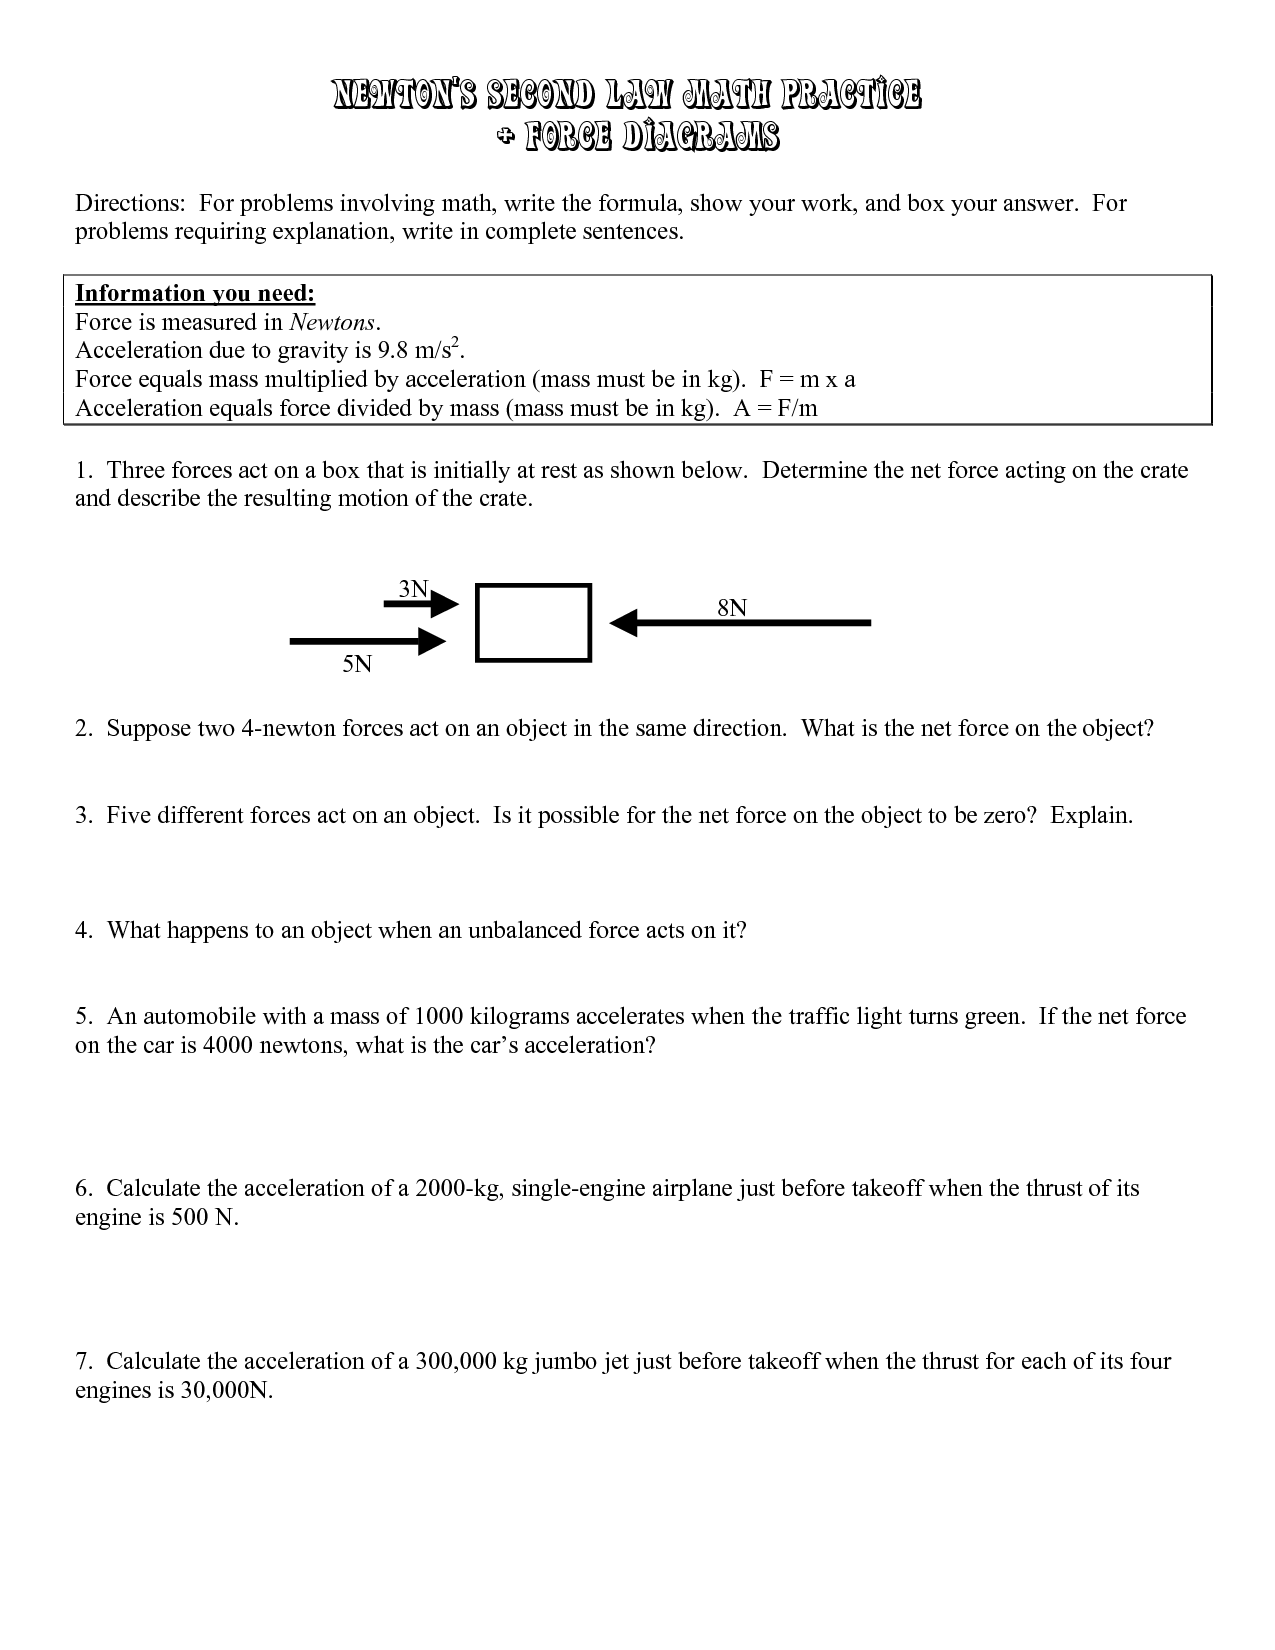 worksheet-newton-s-2nd-law-answers